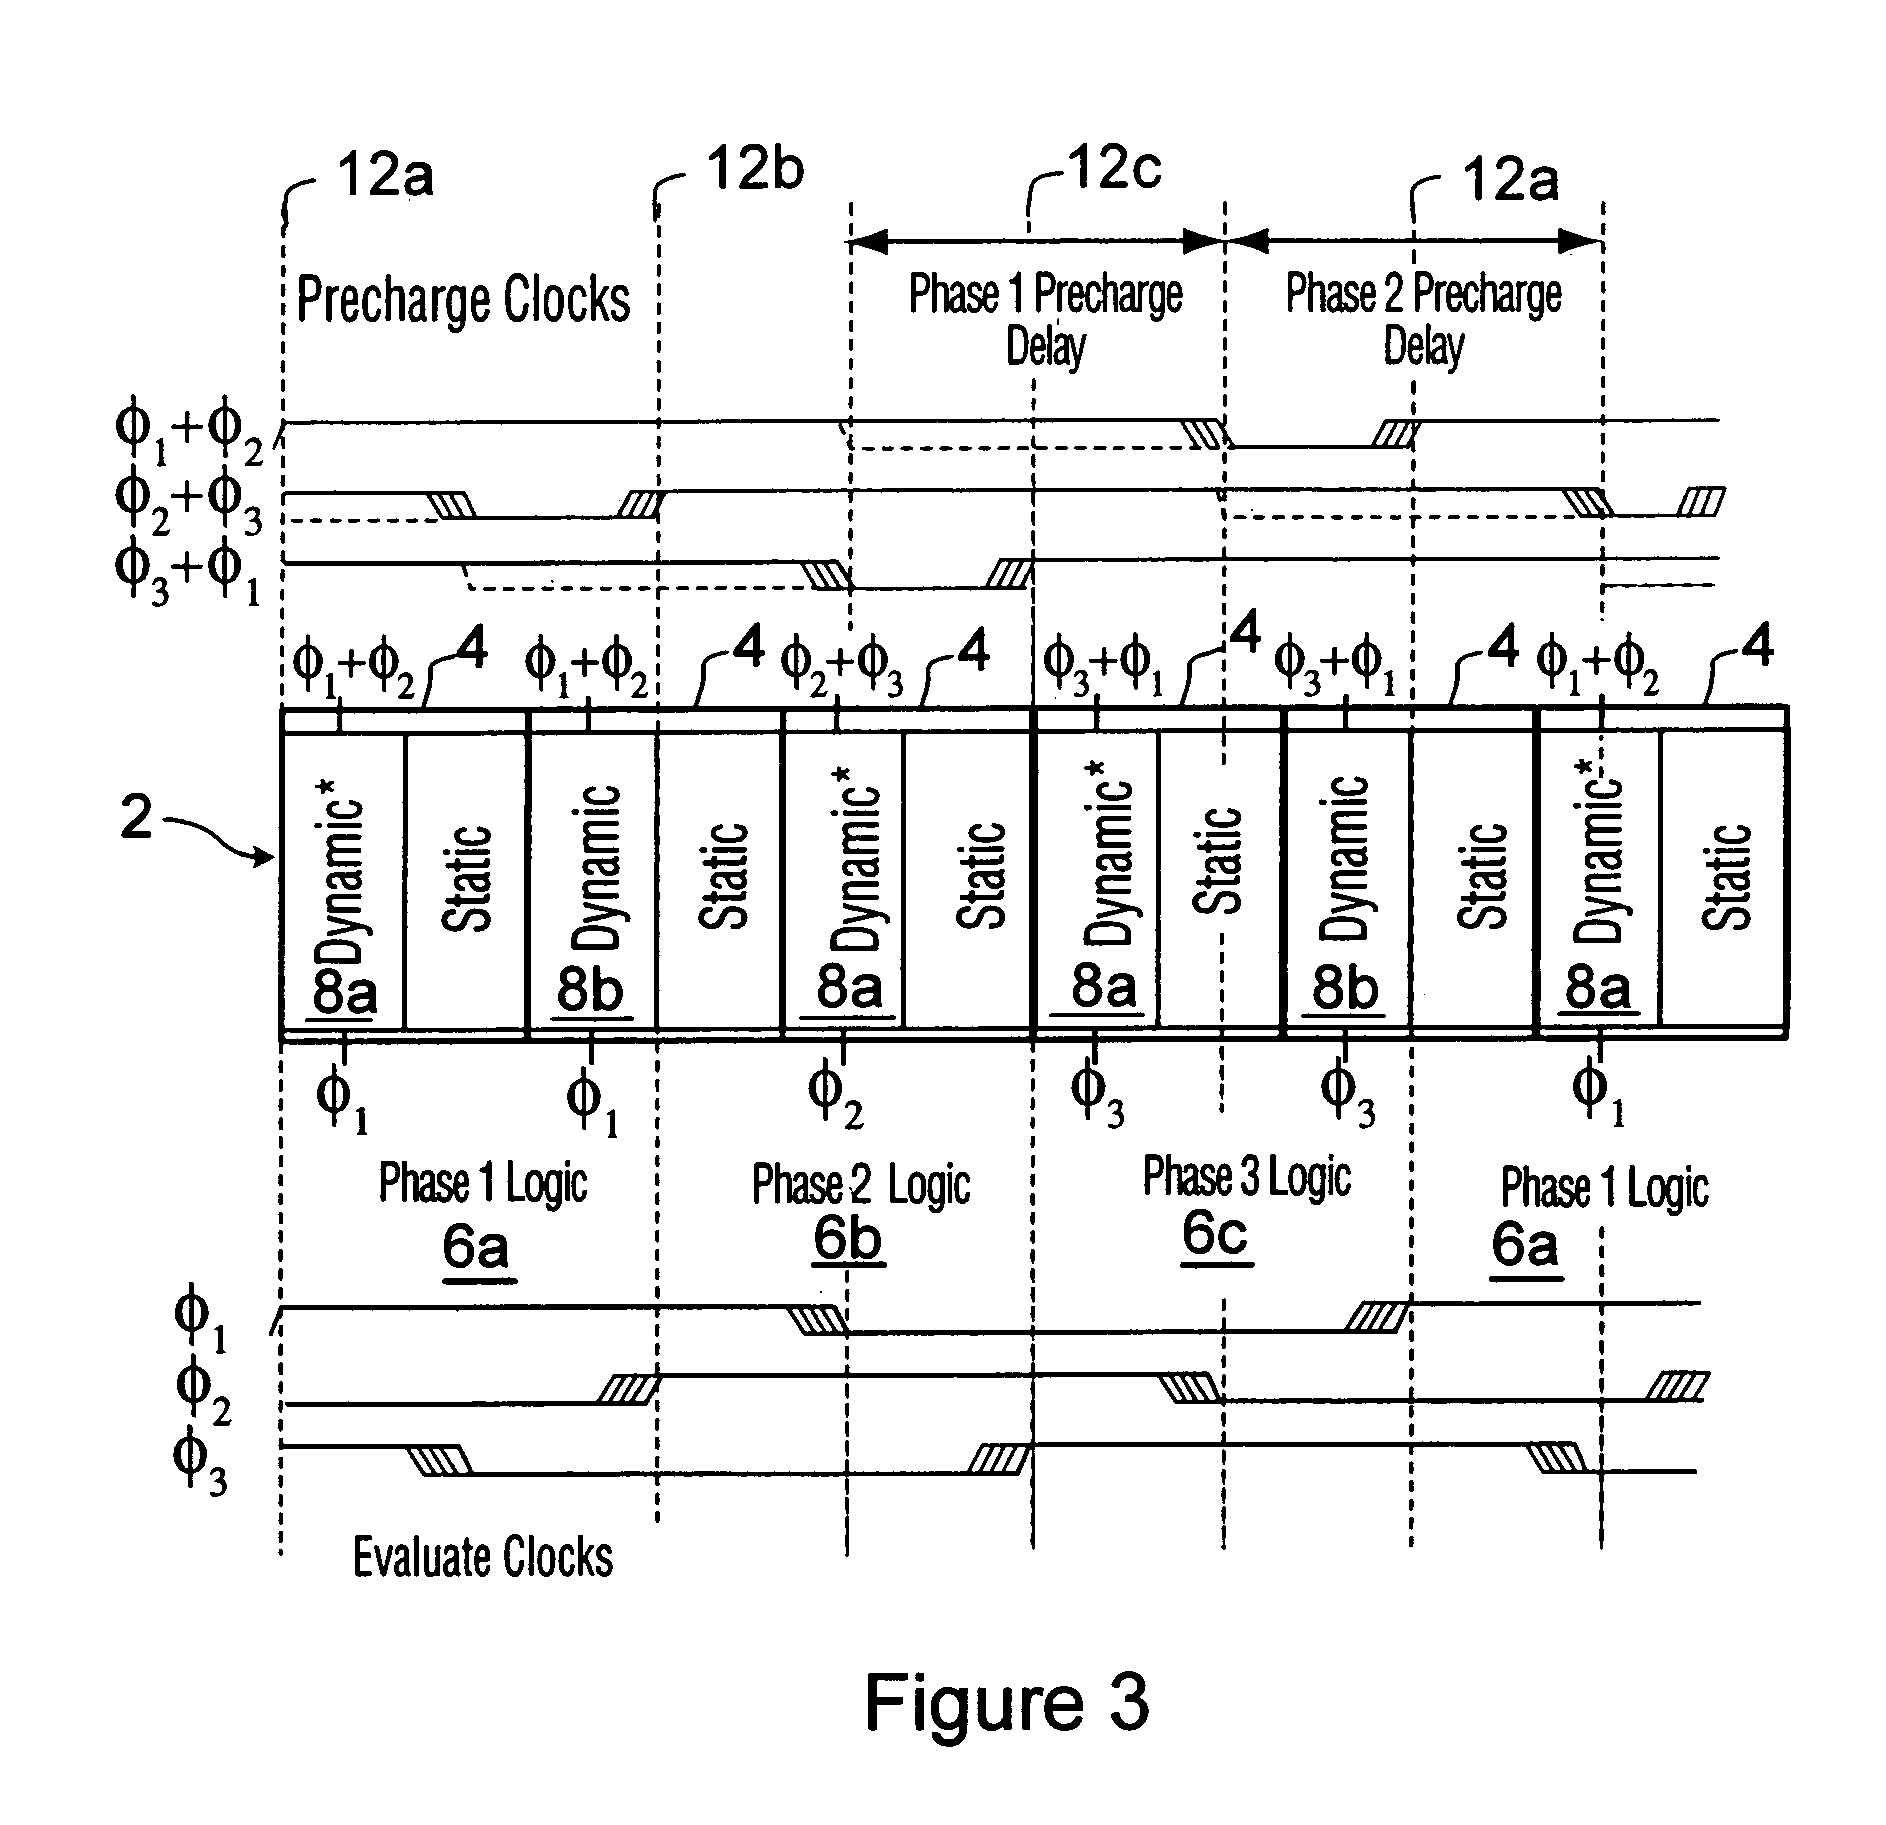 Clock logic domino circuits for high-speed and energy efficient microprocessor pipelines